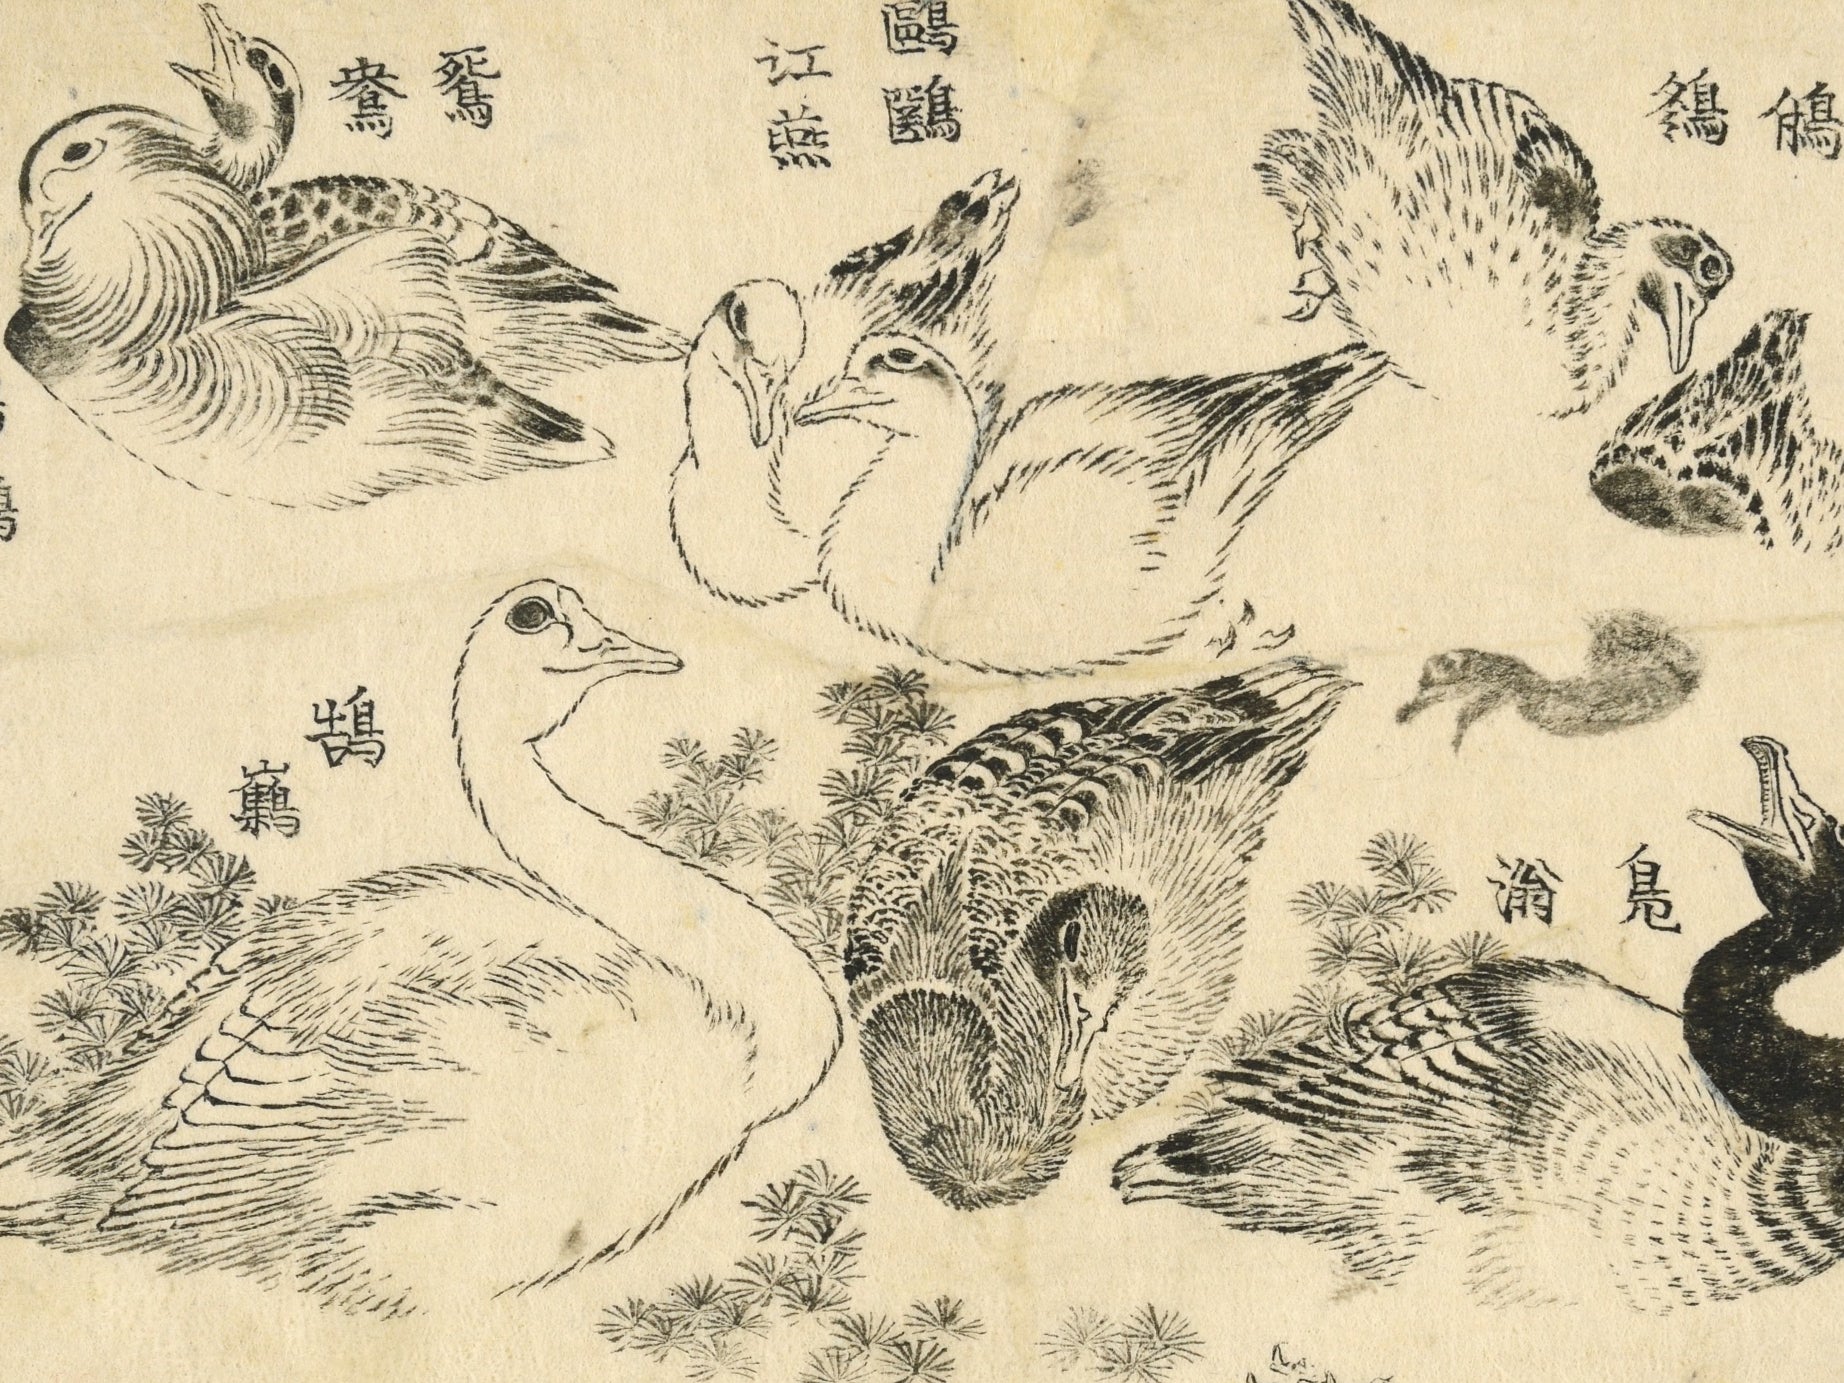 Studies of various types of water bird, swimming and diving among river weed. This work seems to have been intended as a kind of picture thesaurus